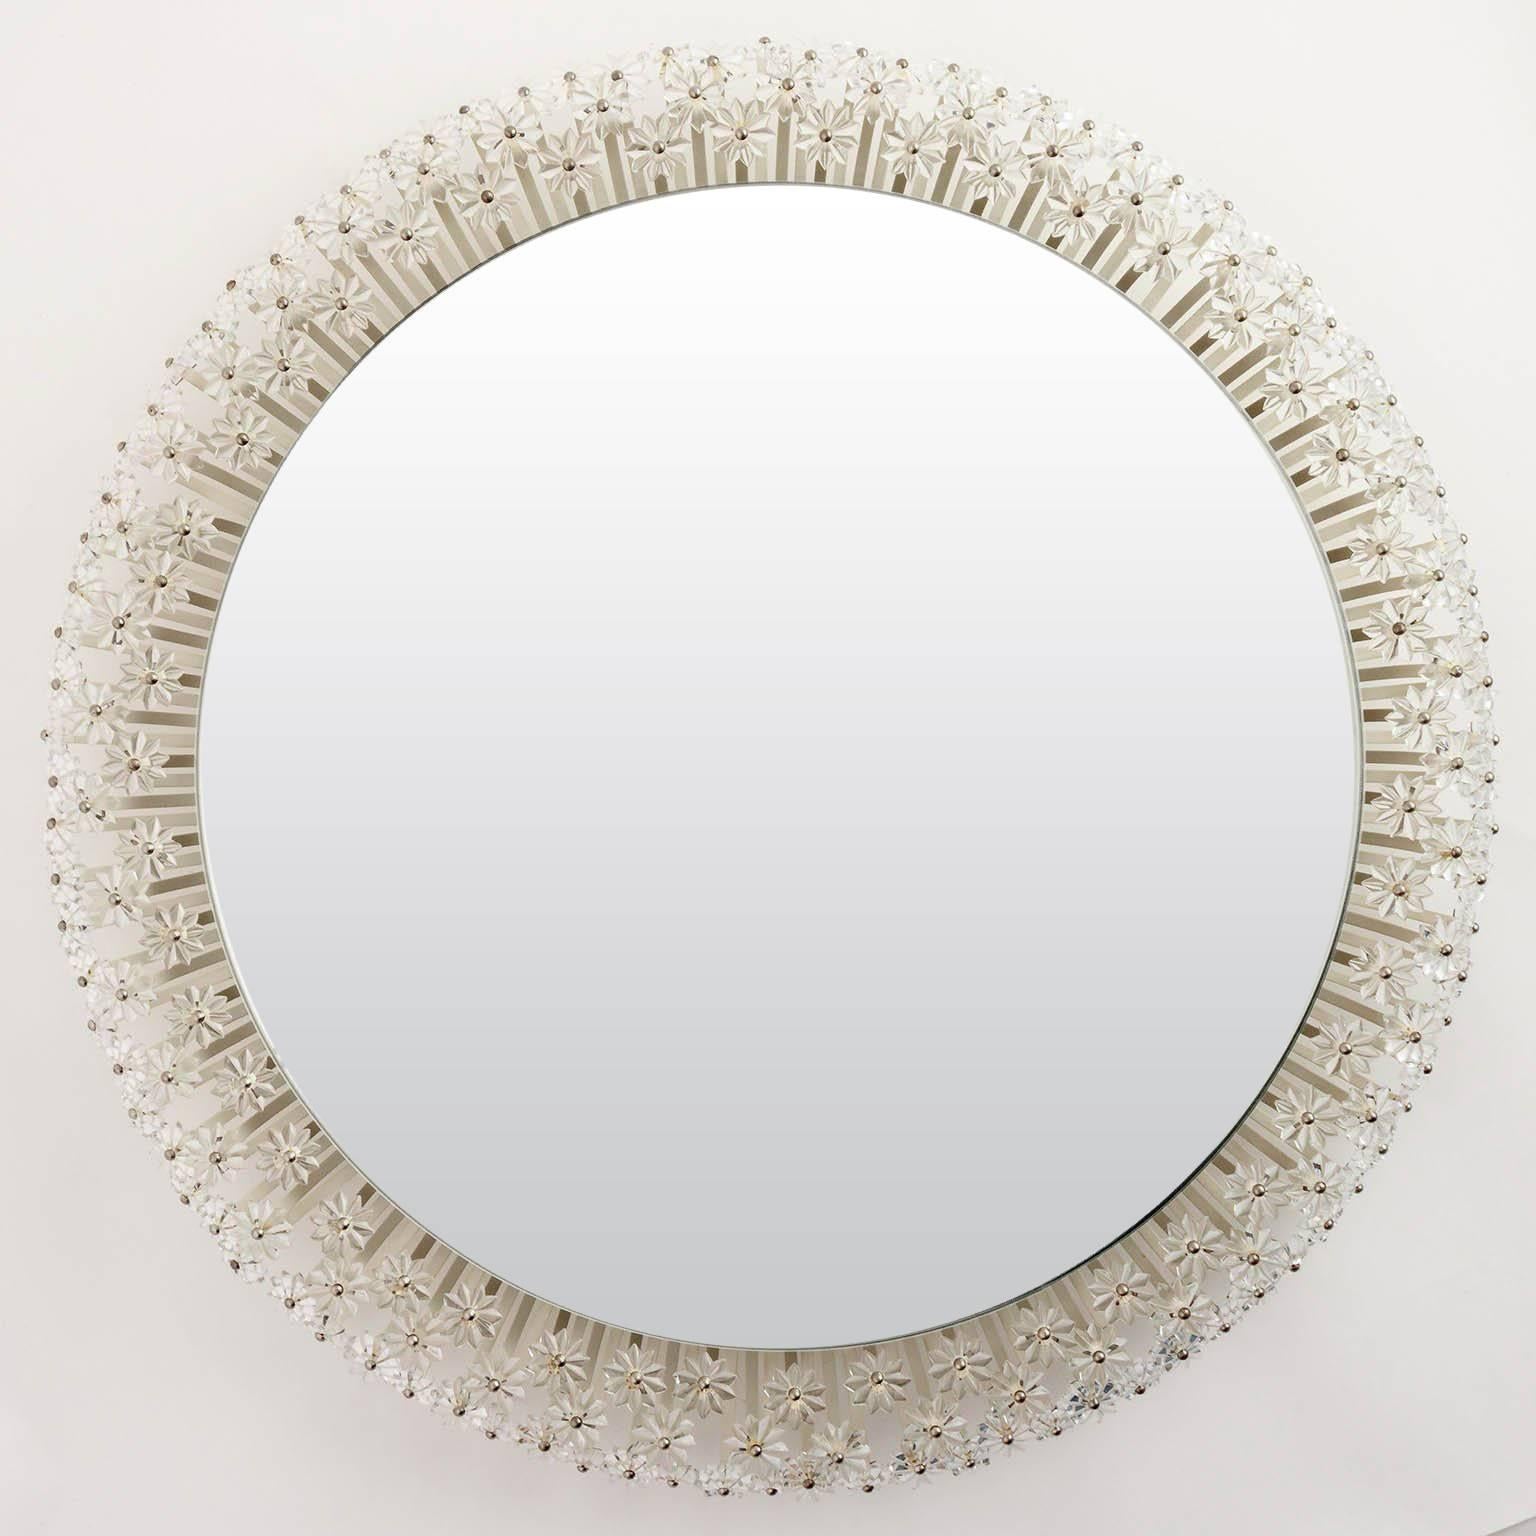 One of two large wall mirrors with illuminated background by Emil Stejnar for Rupert Nikoll, Vienna, Austria, manufactured in midcentury. A round mirror is surrounded by hundreds of glass flowers. This kind of mirror is available in different sizes